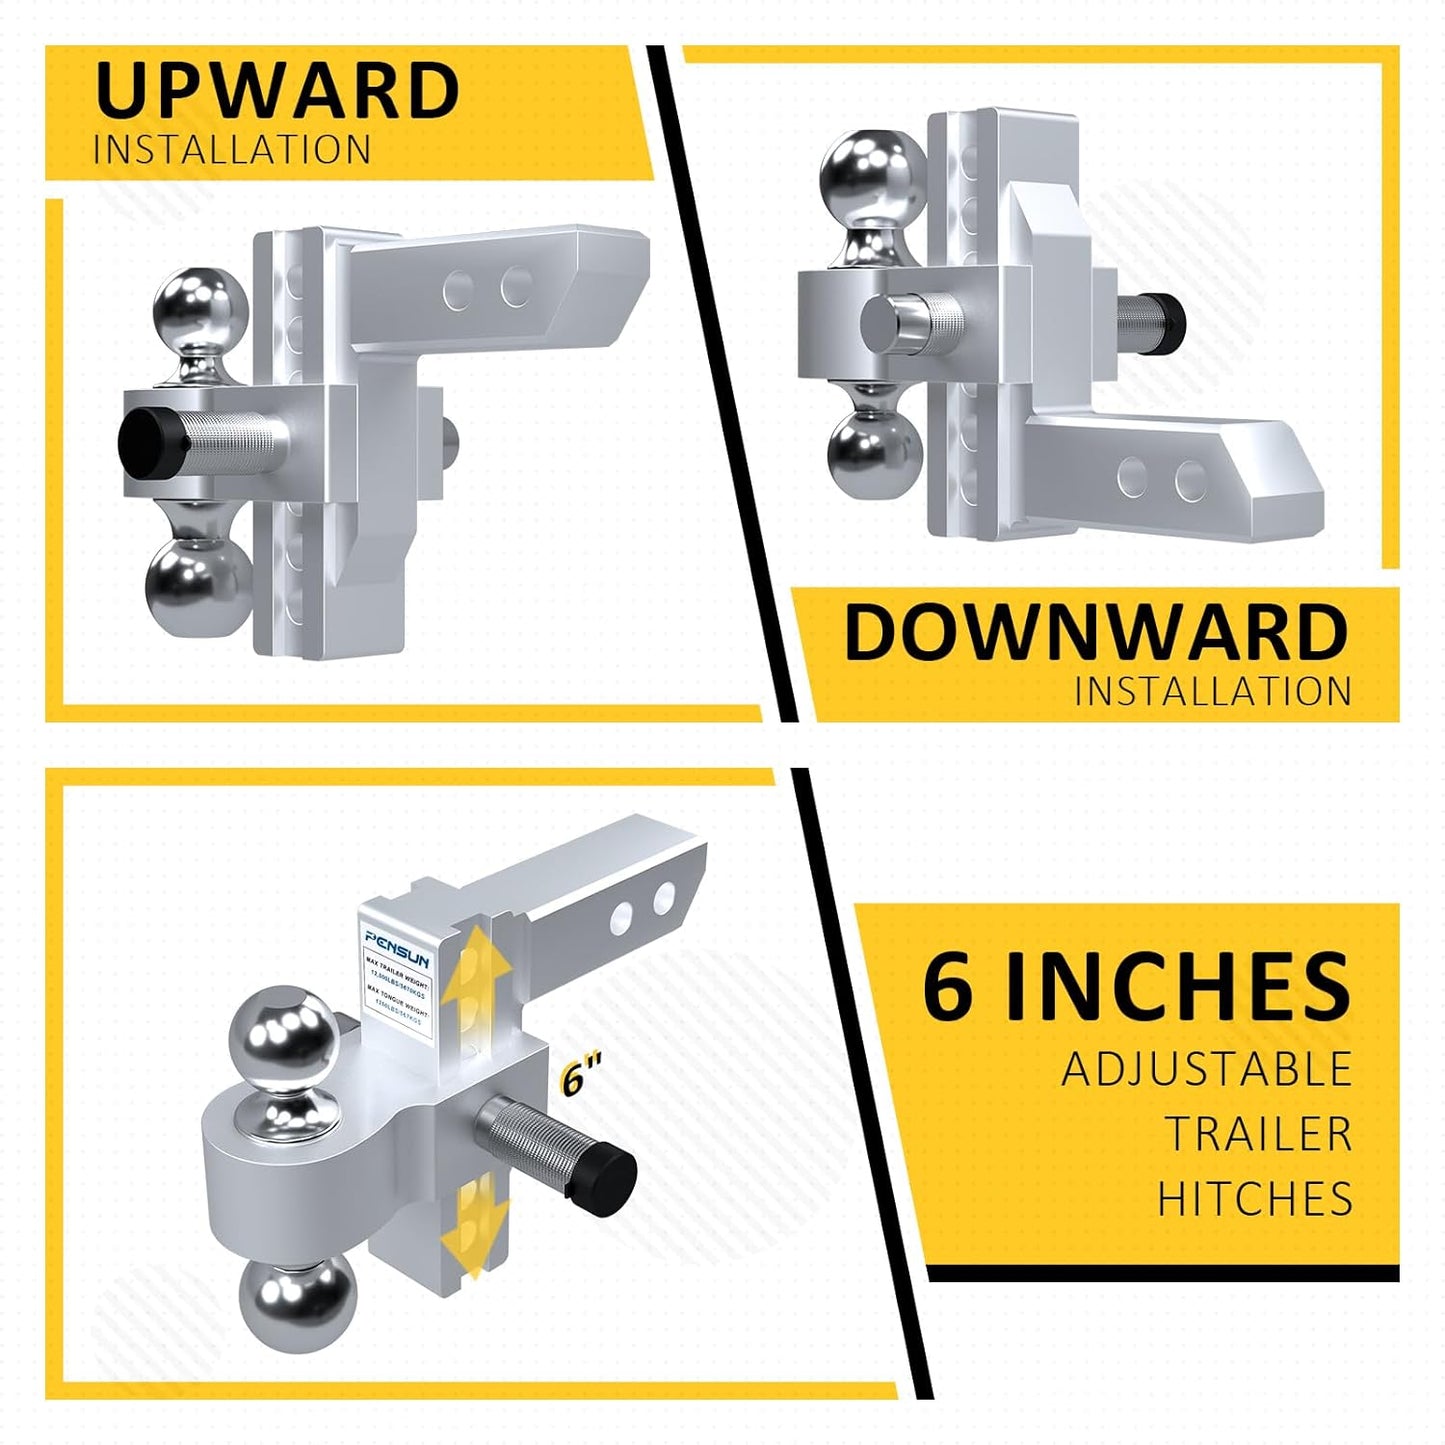 PENSUN Adjustable Trailer Hitch - 6" Drop/Rise Aluminum Drop Hitch with 2'' & 2-5/16'' Solid Dual Balls Mount Fit for 2" Receiver 12500 lbs Heavy Duty Tow Hitch with Double Anti-Theft Pins Locks